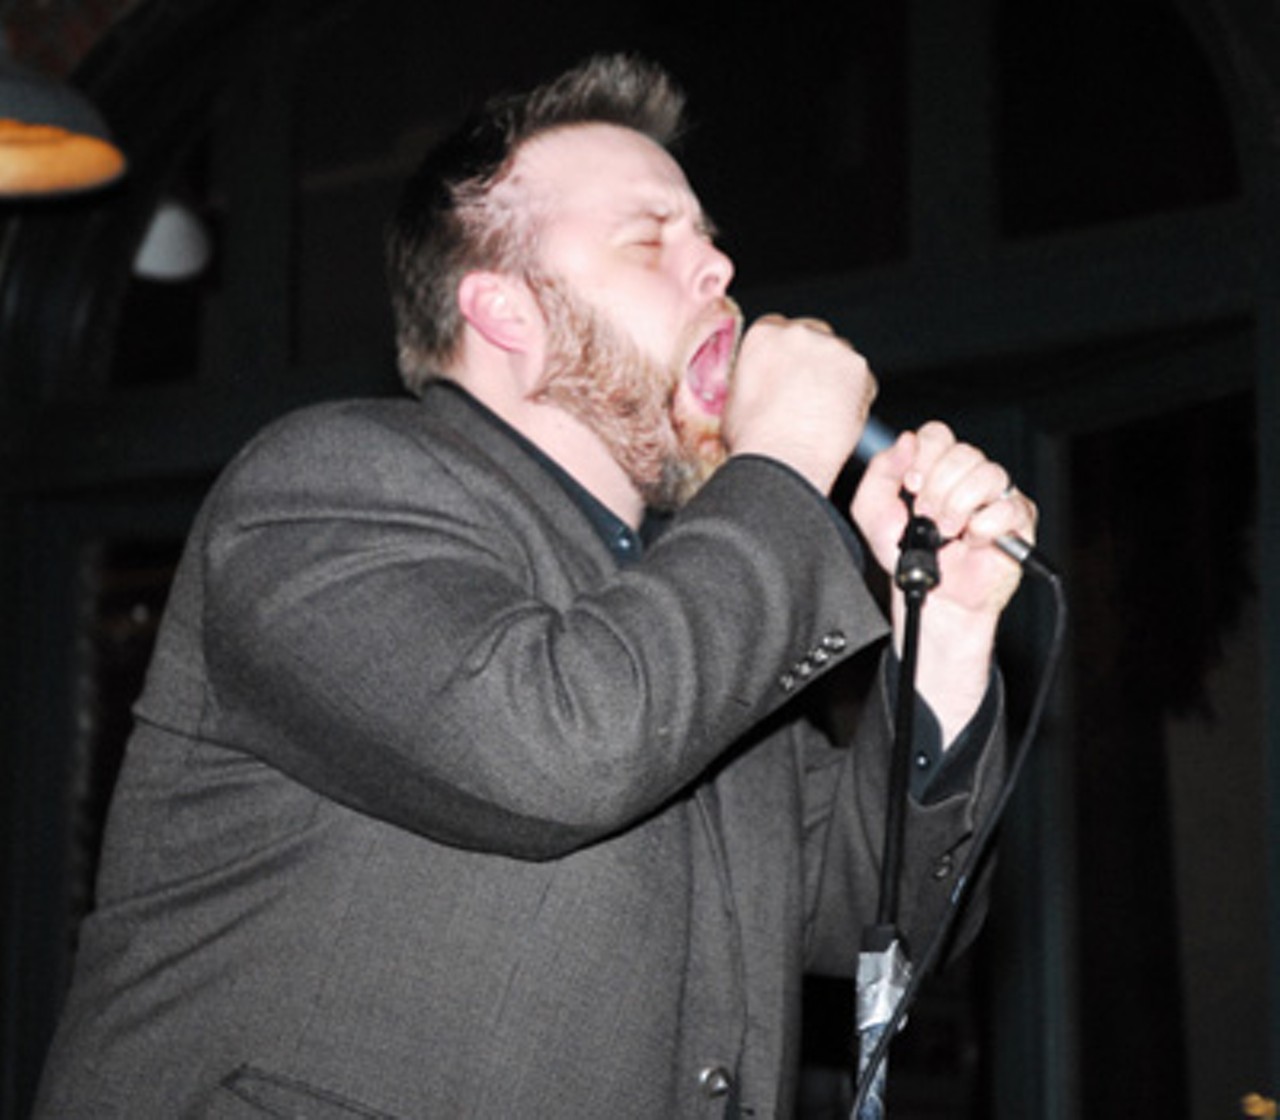 A guest singer with the Pat Sajak Assassins for one song on January 2 at the Schlafly Tap Room.